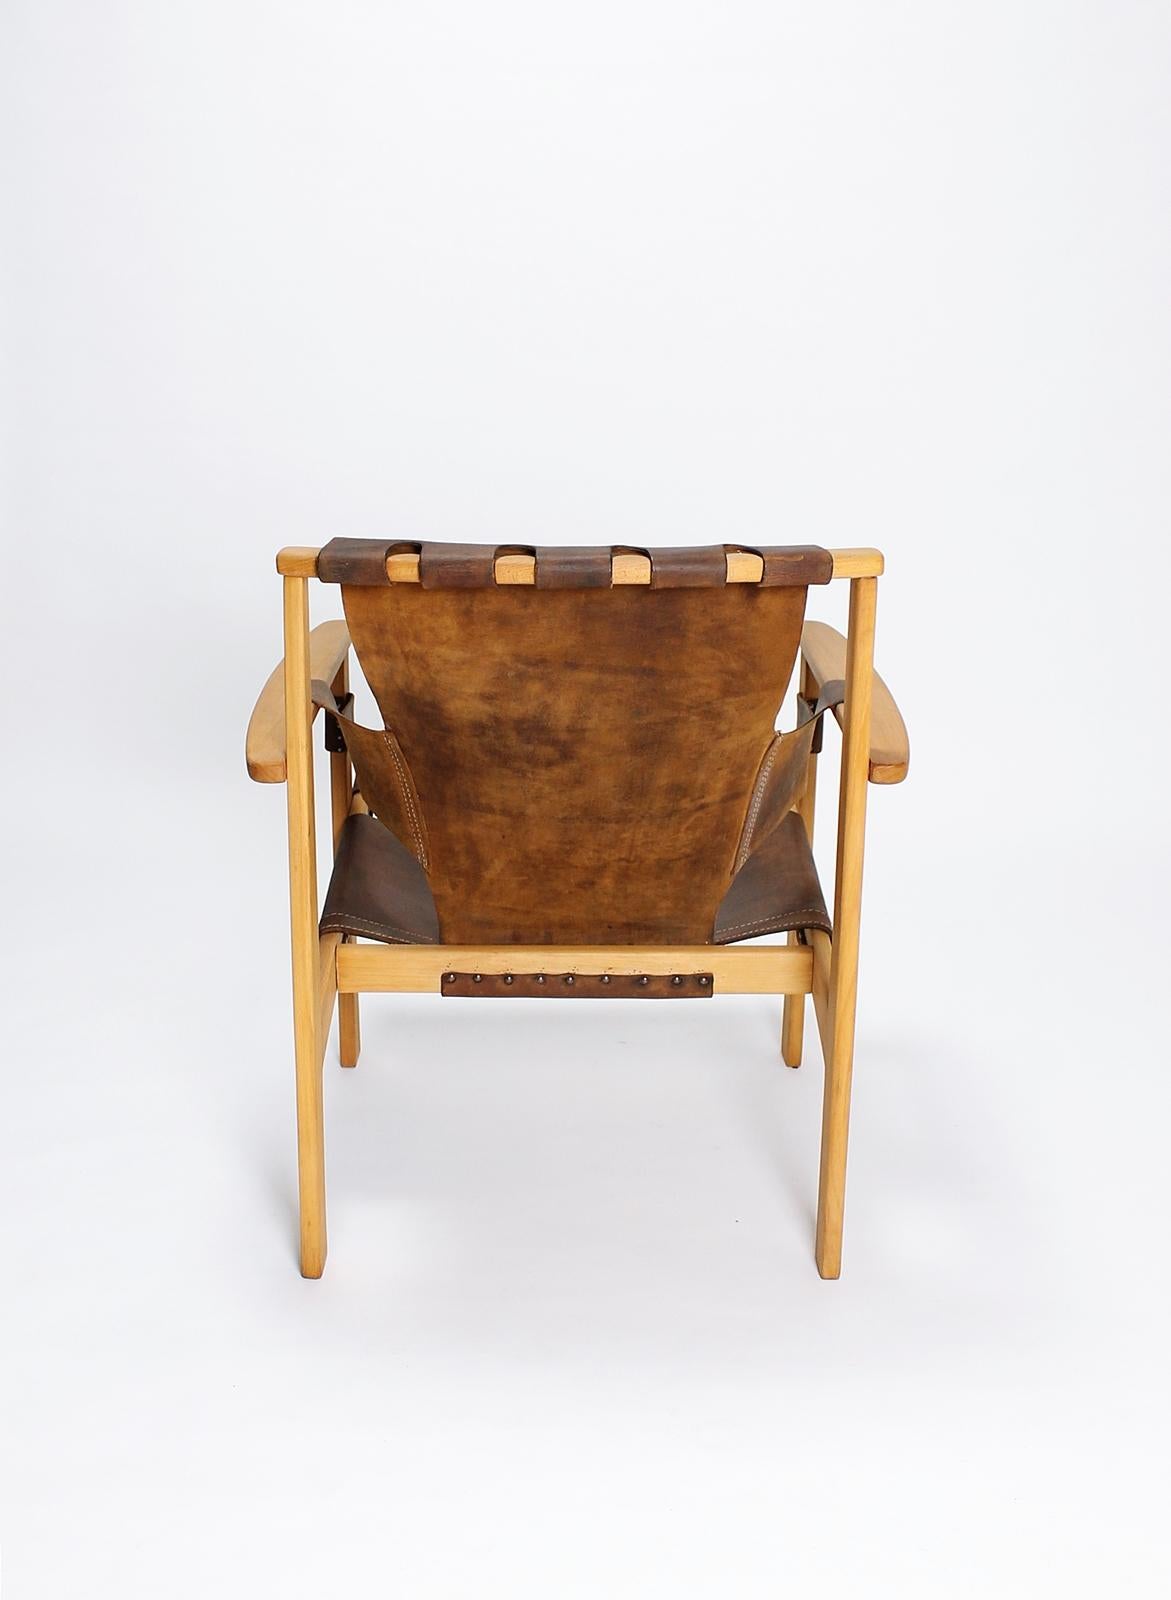 Mid-20th Century Vintage Swedish Trienna Armchair by Carl-Axel Acking for Nordiska Kompaniet For Sale